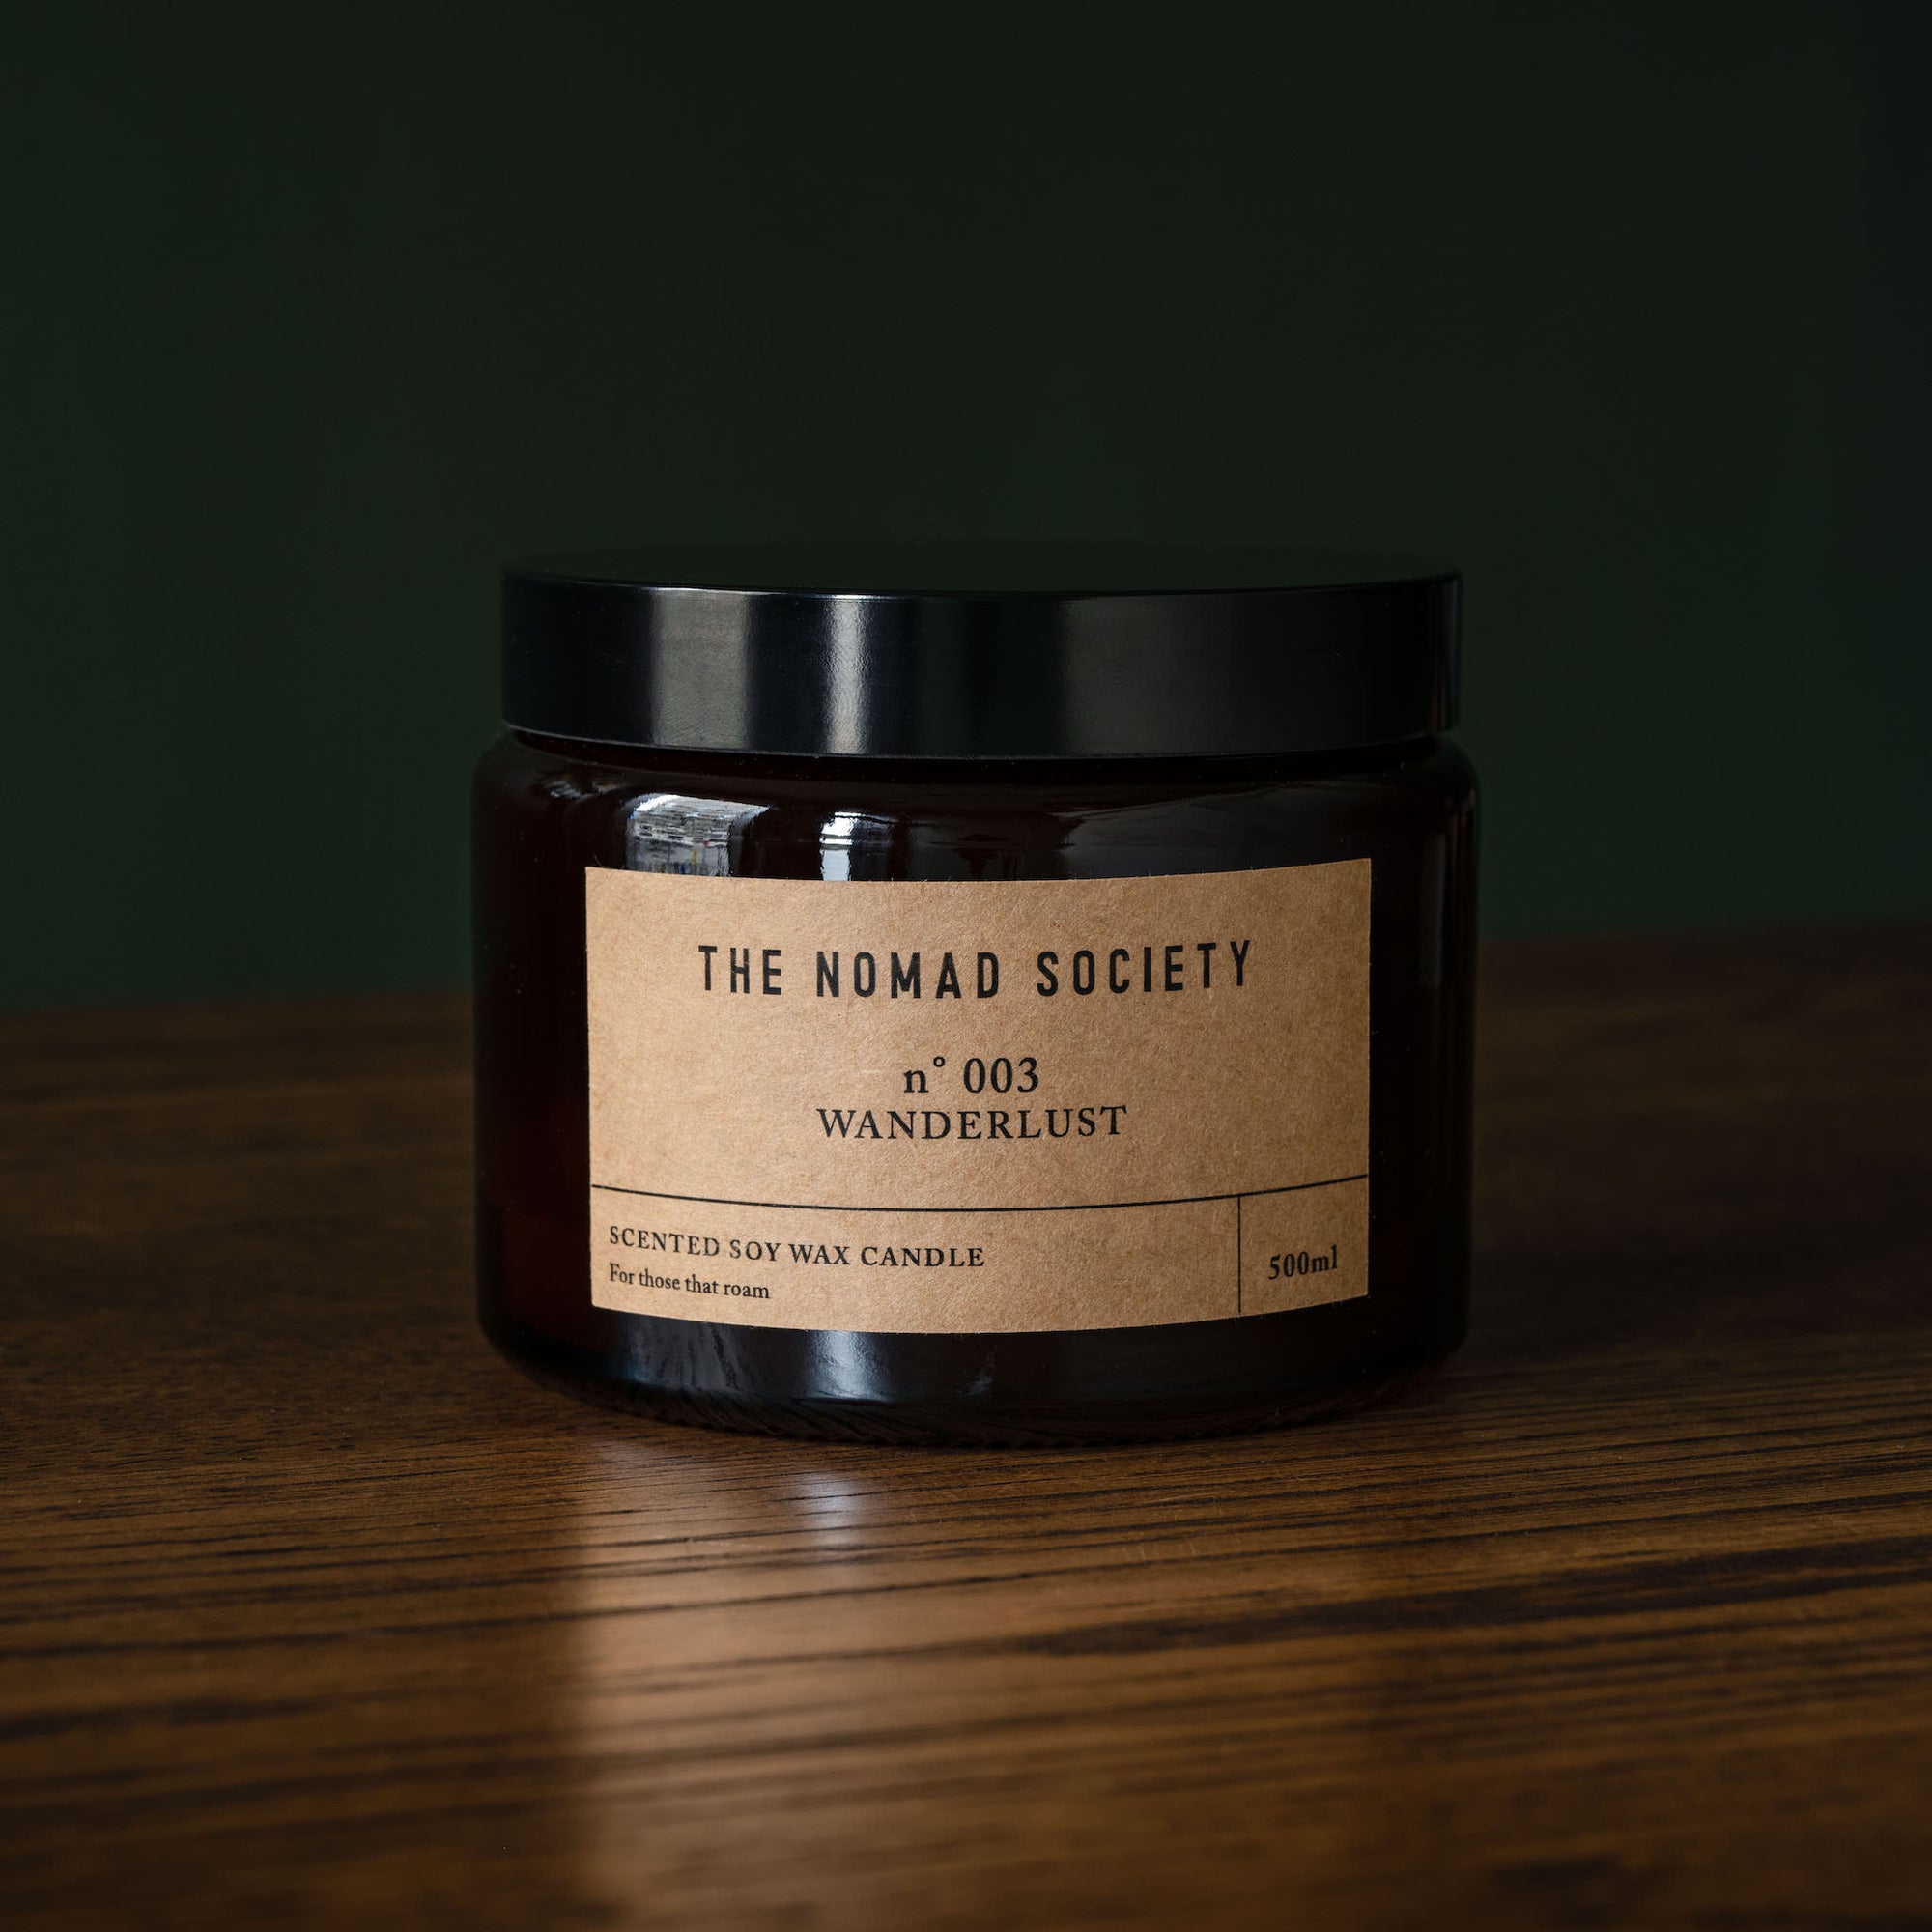 The Nomad Society large Wanderlust scented candle